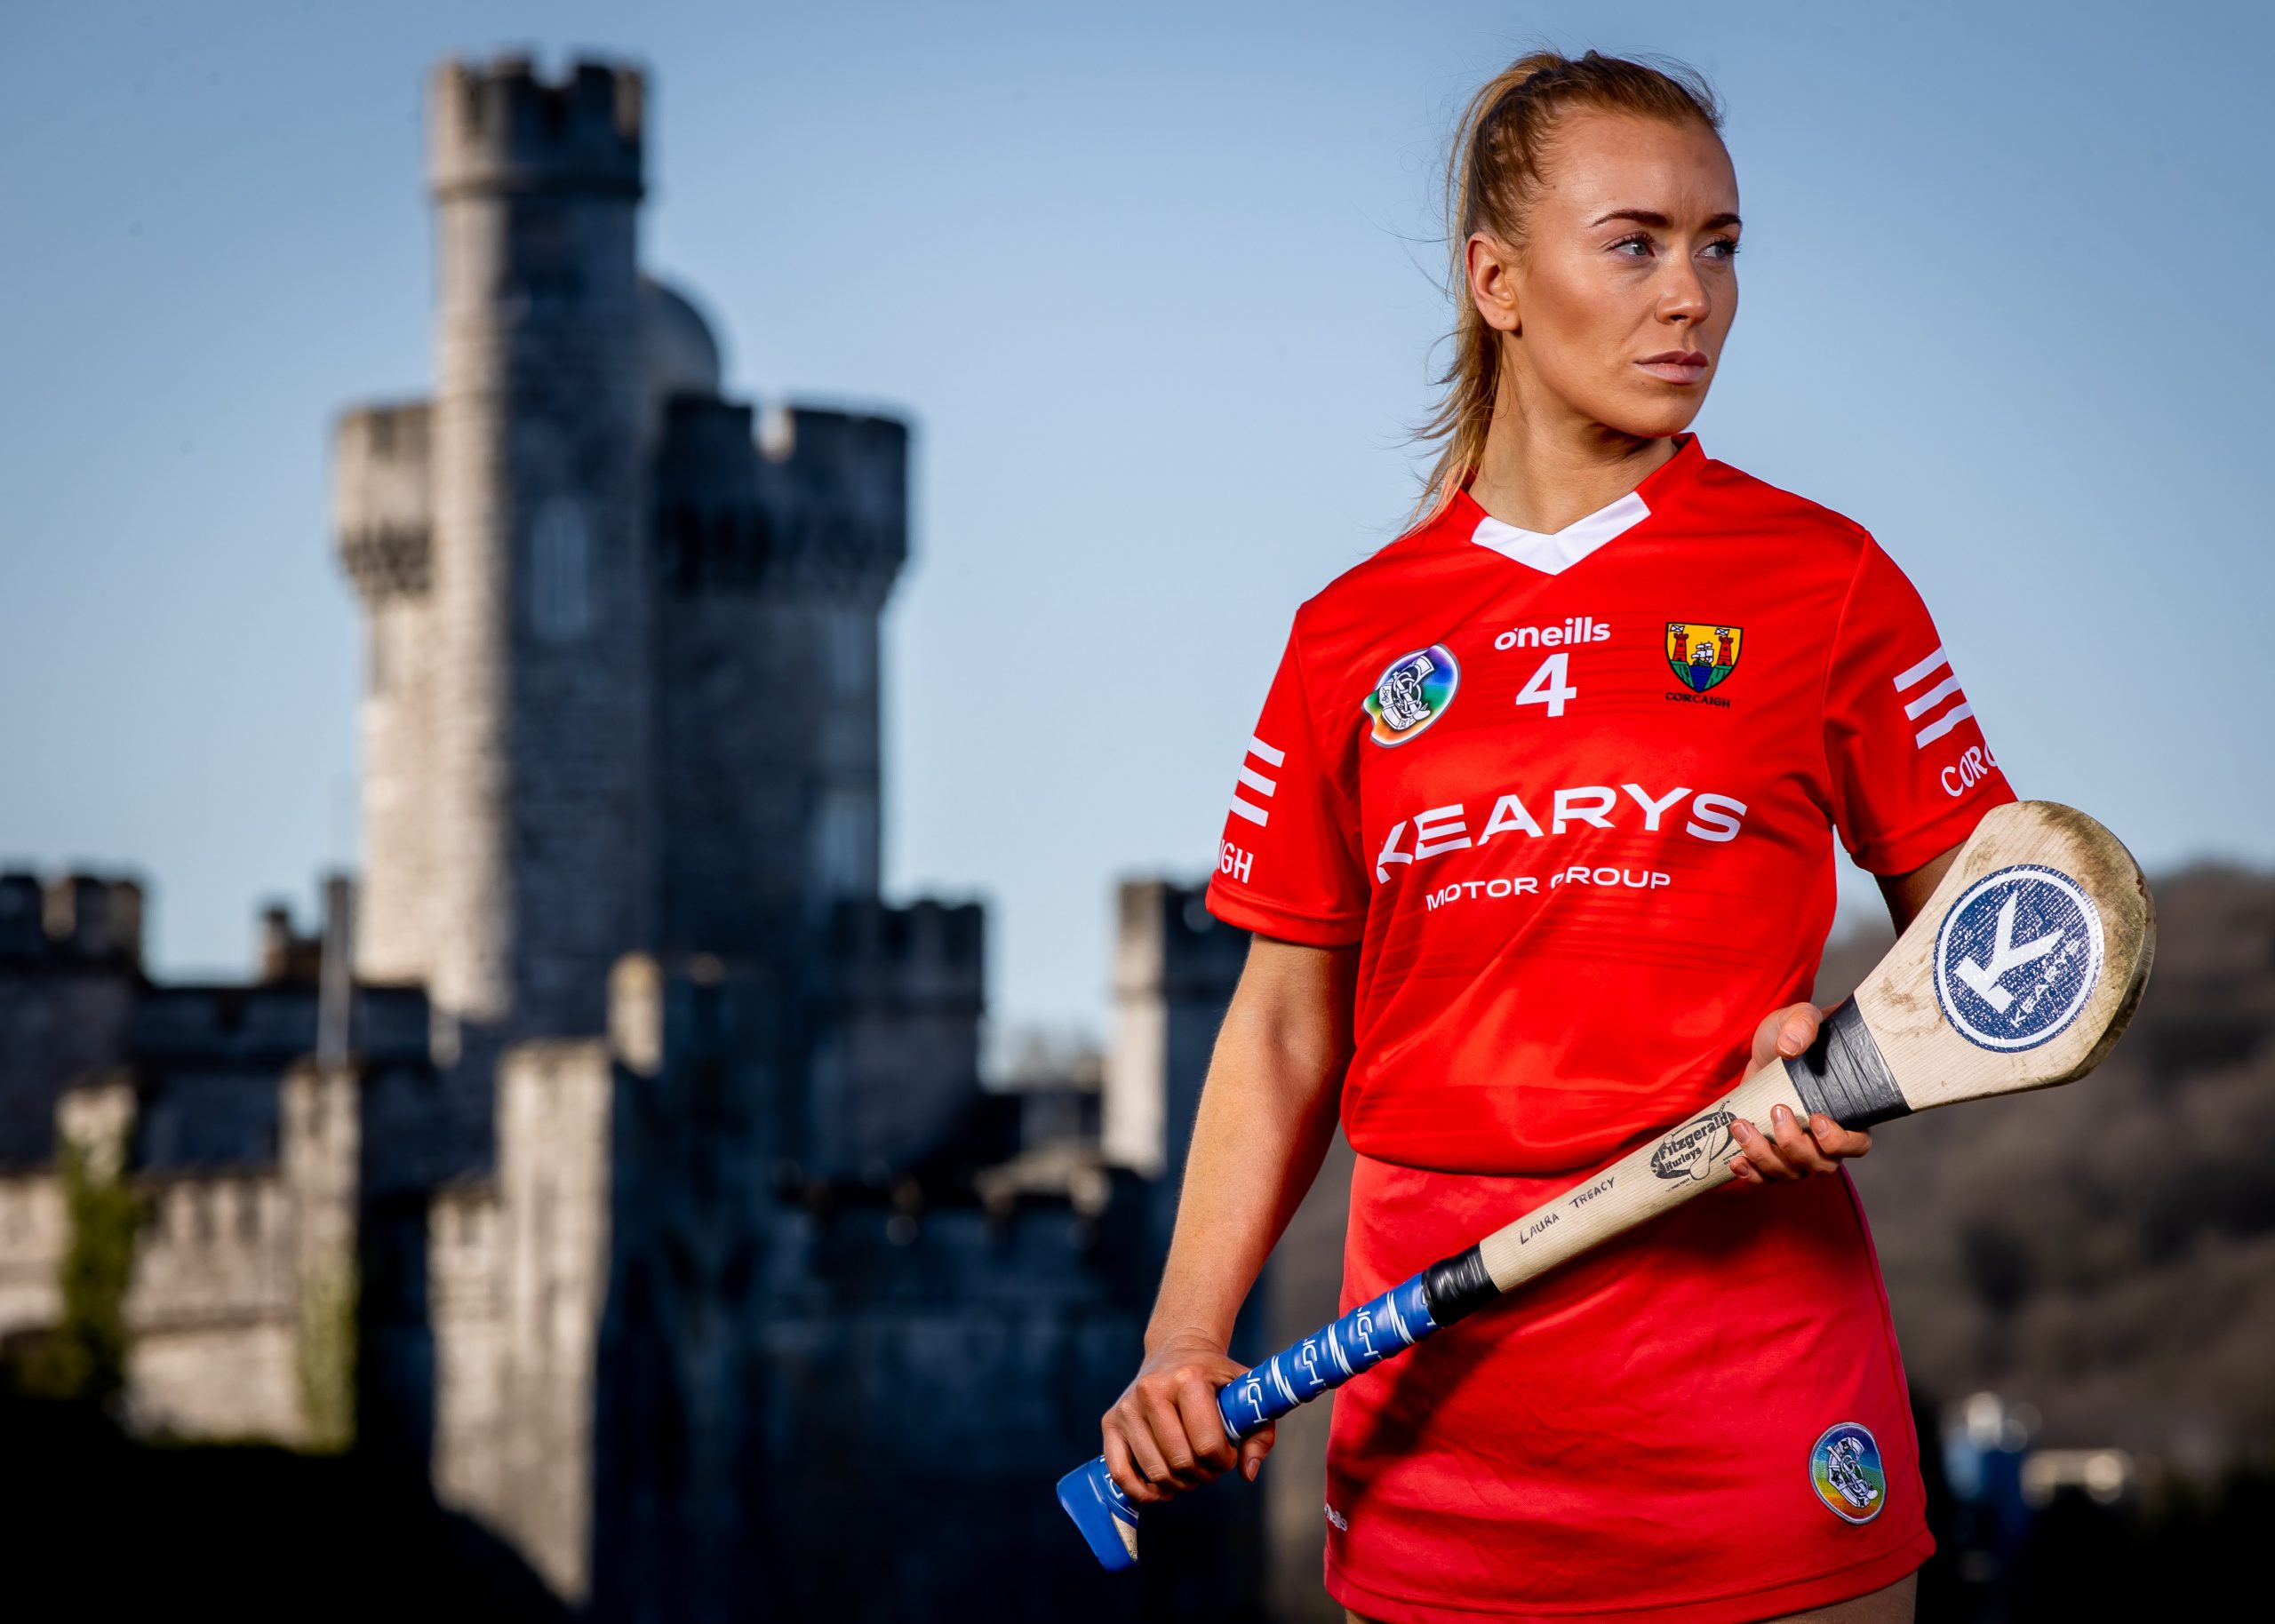 FEATURE: “My first All-Ireland in 2014, I was 18 turning 19 and I was a bábóg”